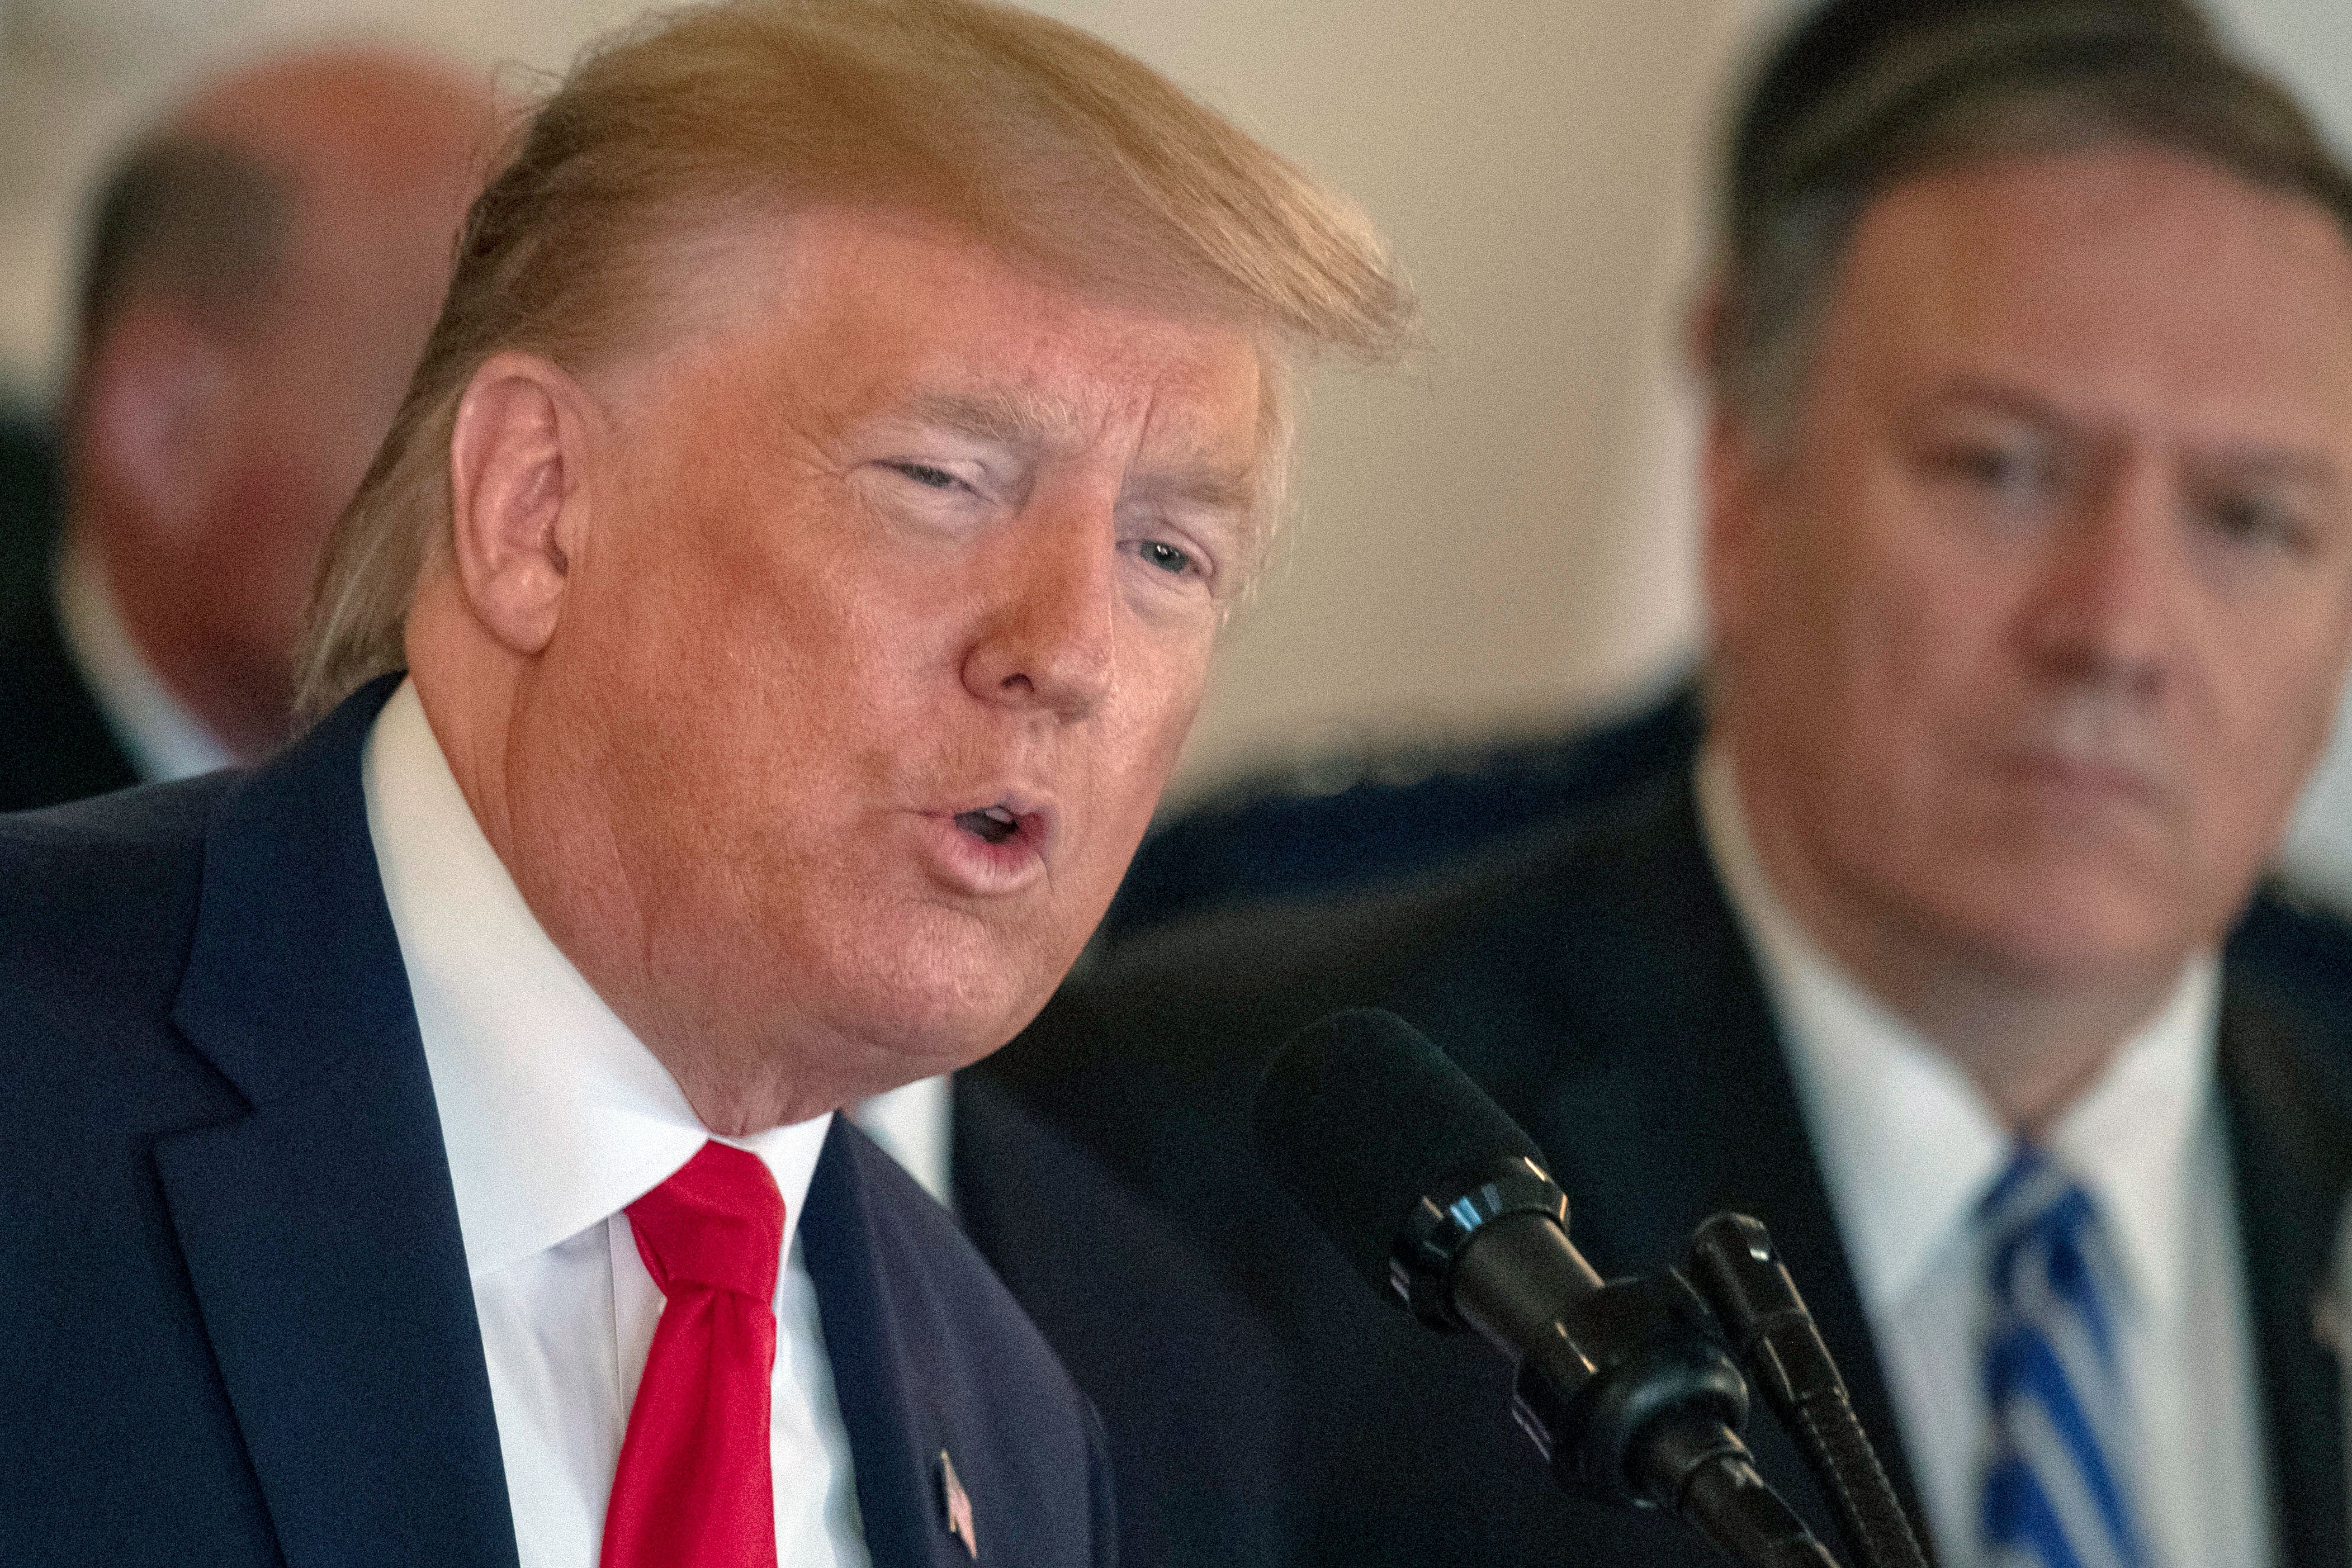 US Secretary of State Mike Pompeo(R) listens as US President Donald Trump speaks about the situation with Iran in the Grand Foyer of the White House in Washington, DC, January 8, 2020. (Photo by ERIC BARADAT/AFP via Getty Images)